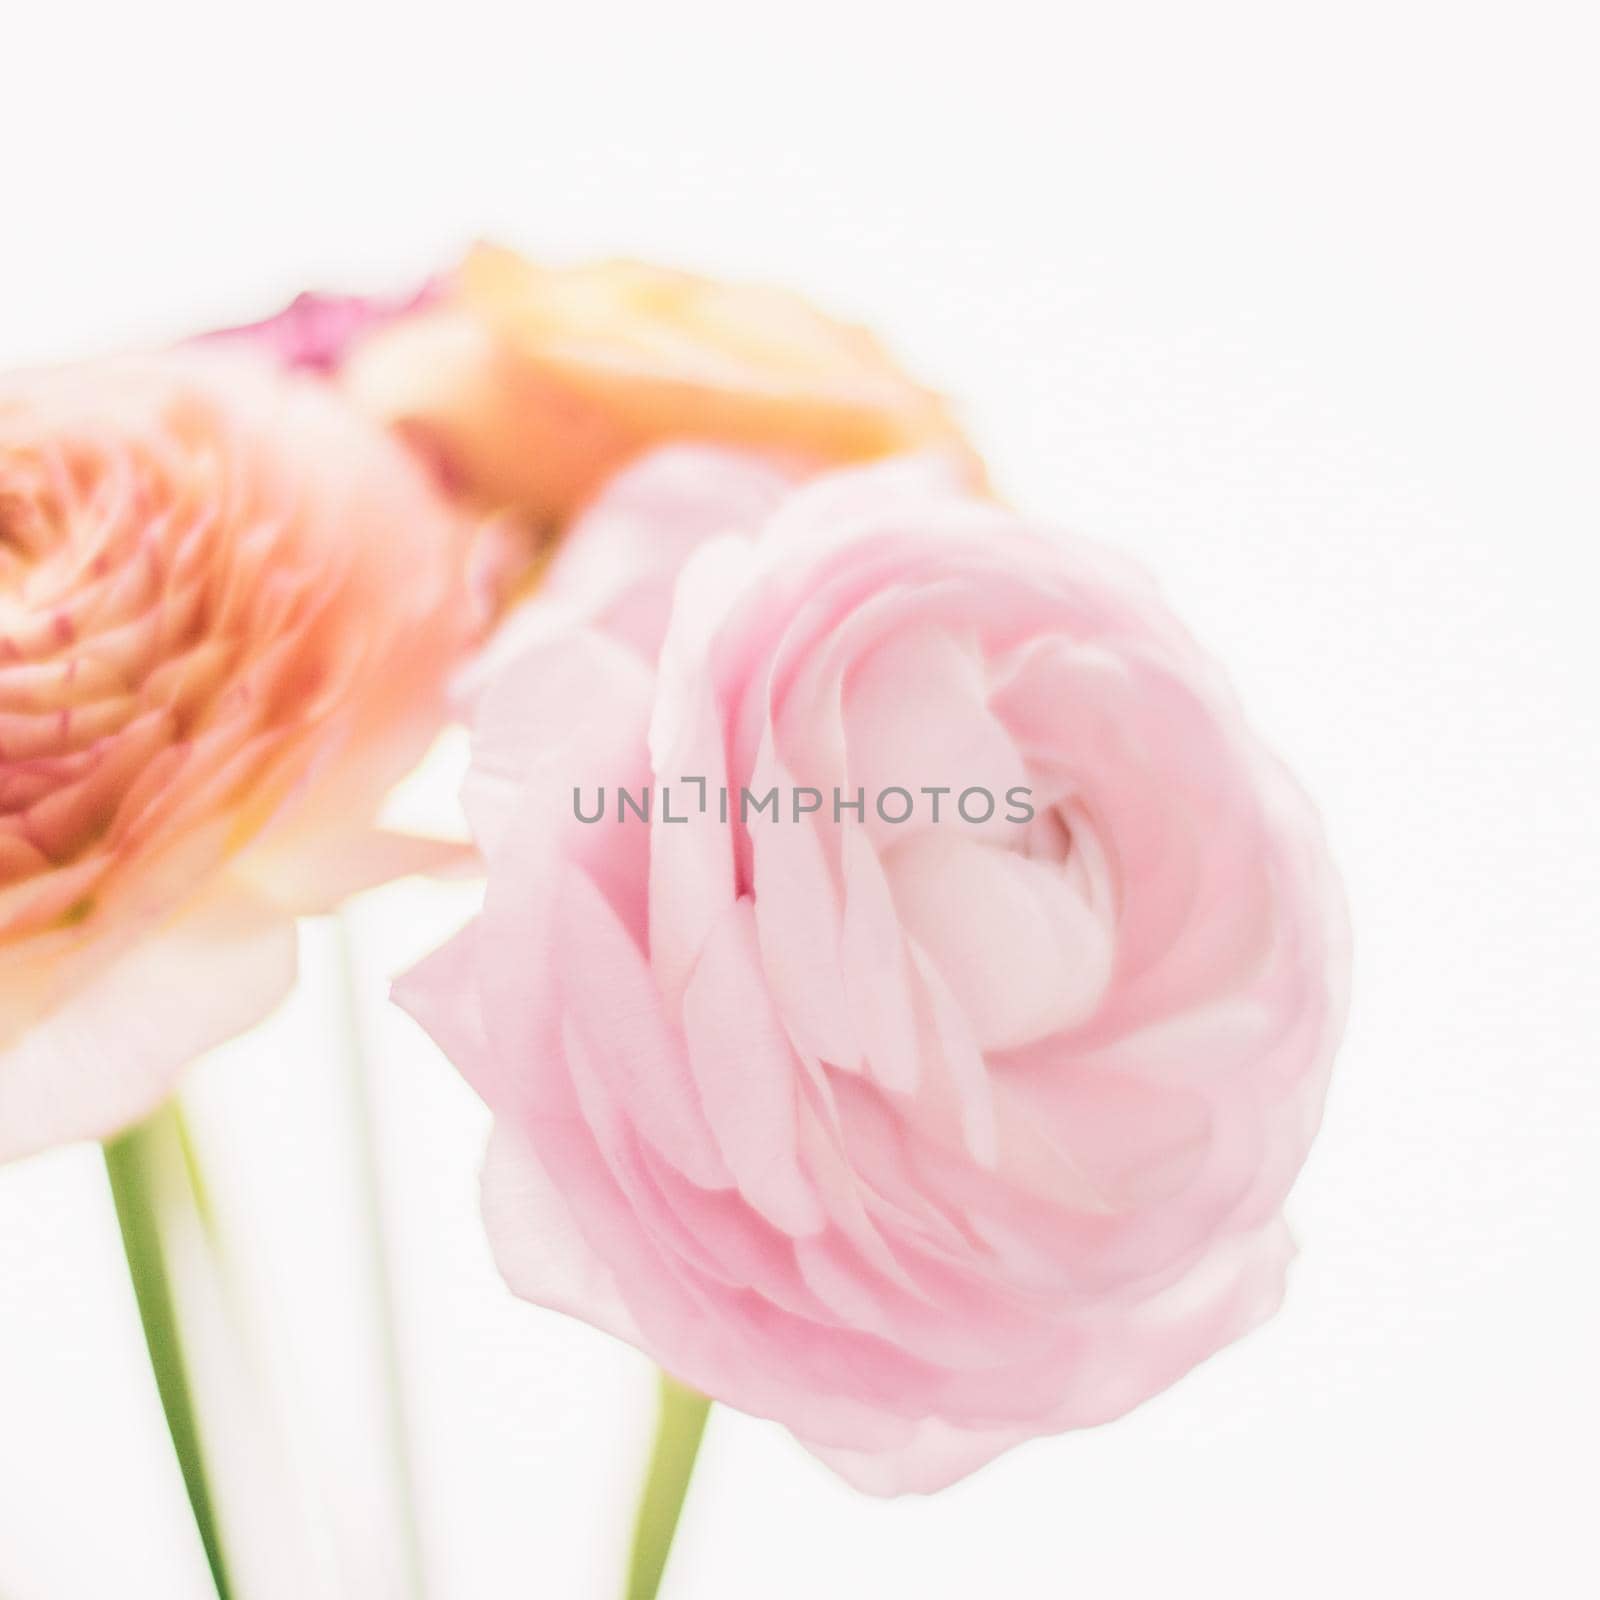 pink rose flowers from the garden - wedding, holiday and floral garden styled concept, elegant visuals